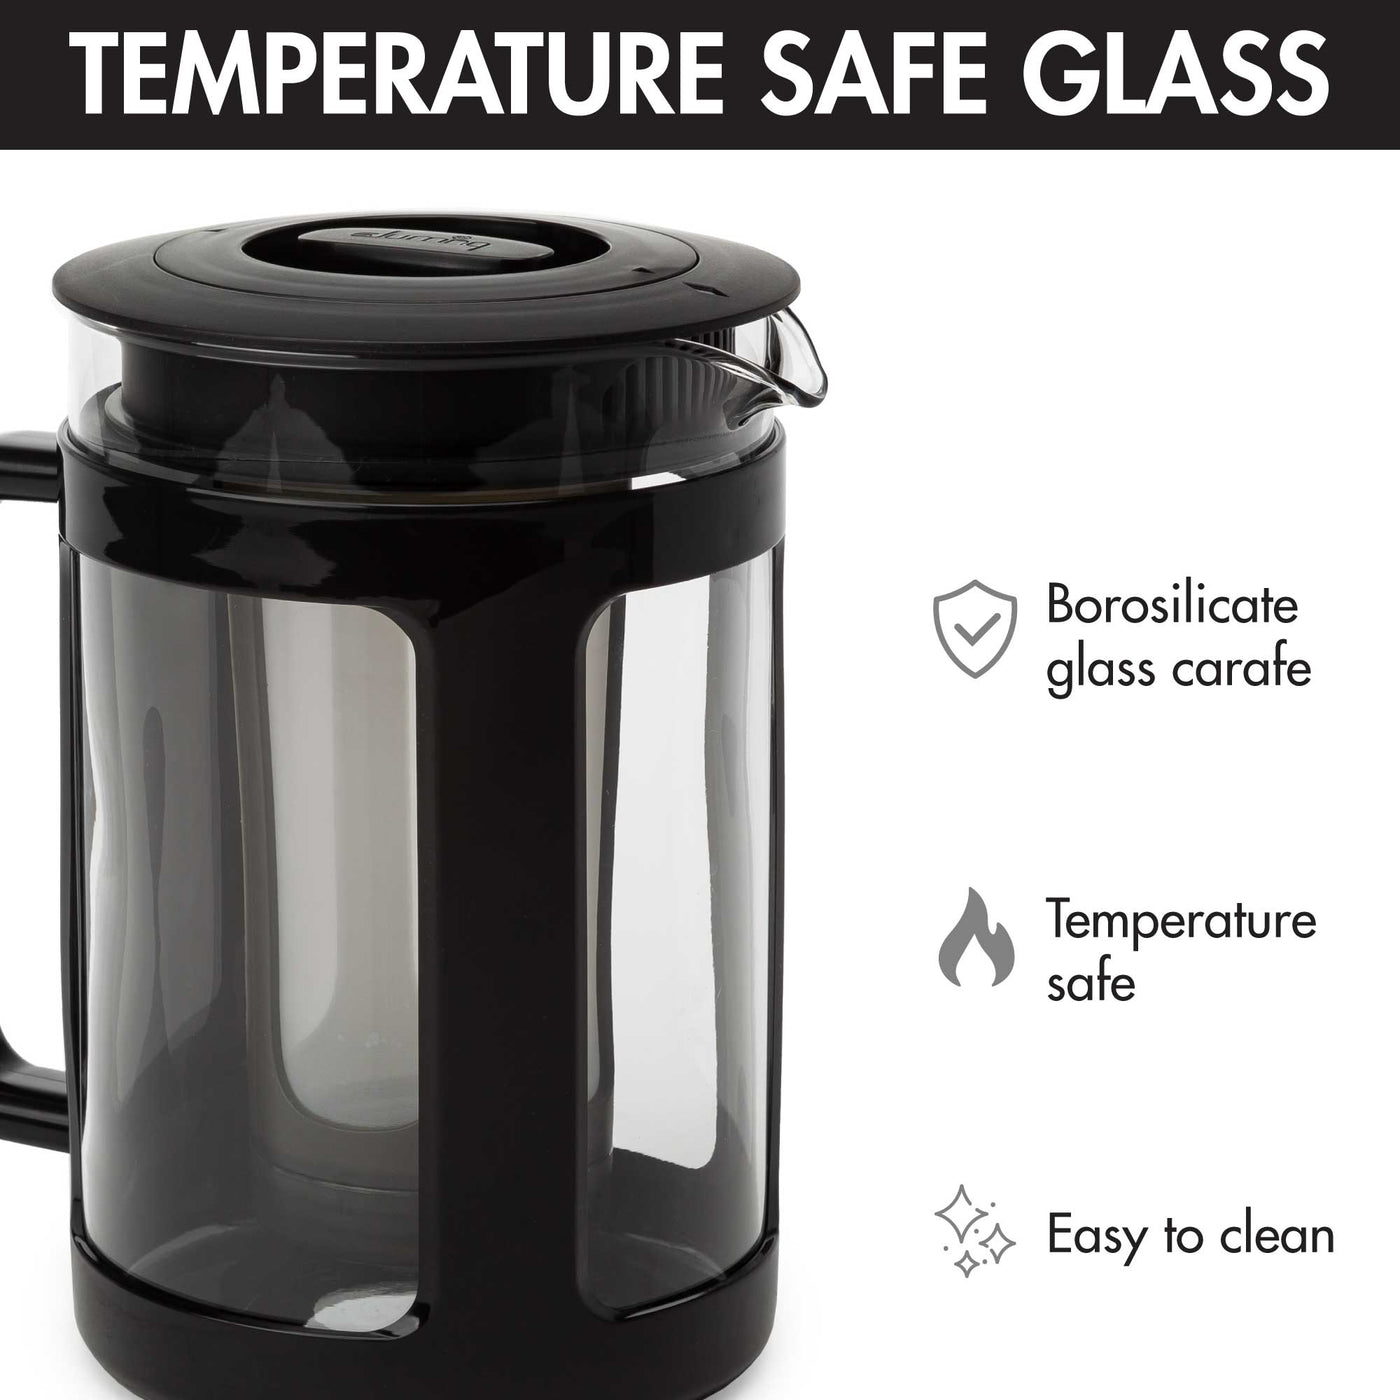  Primula Pace Cold Brew Iced Coffee Maker with Durable